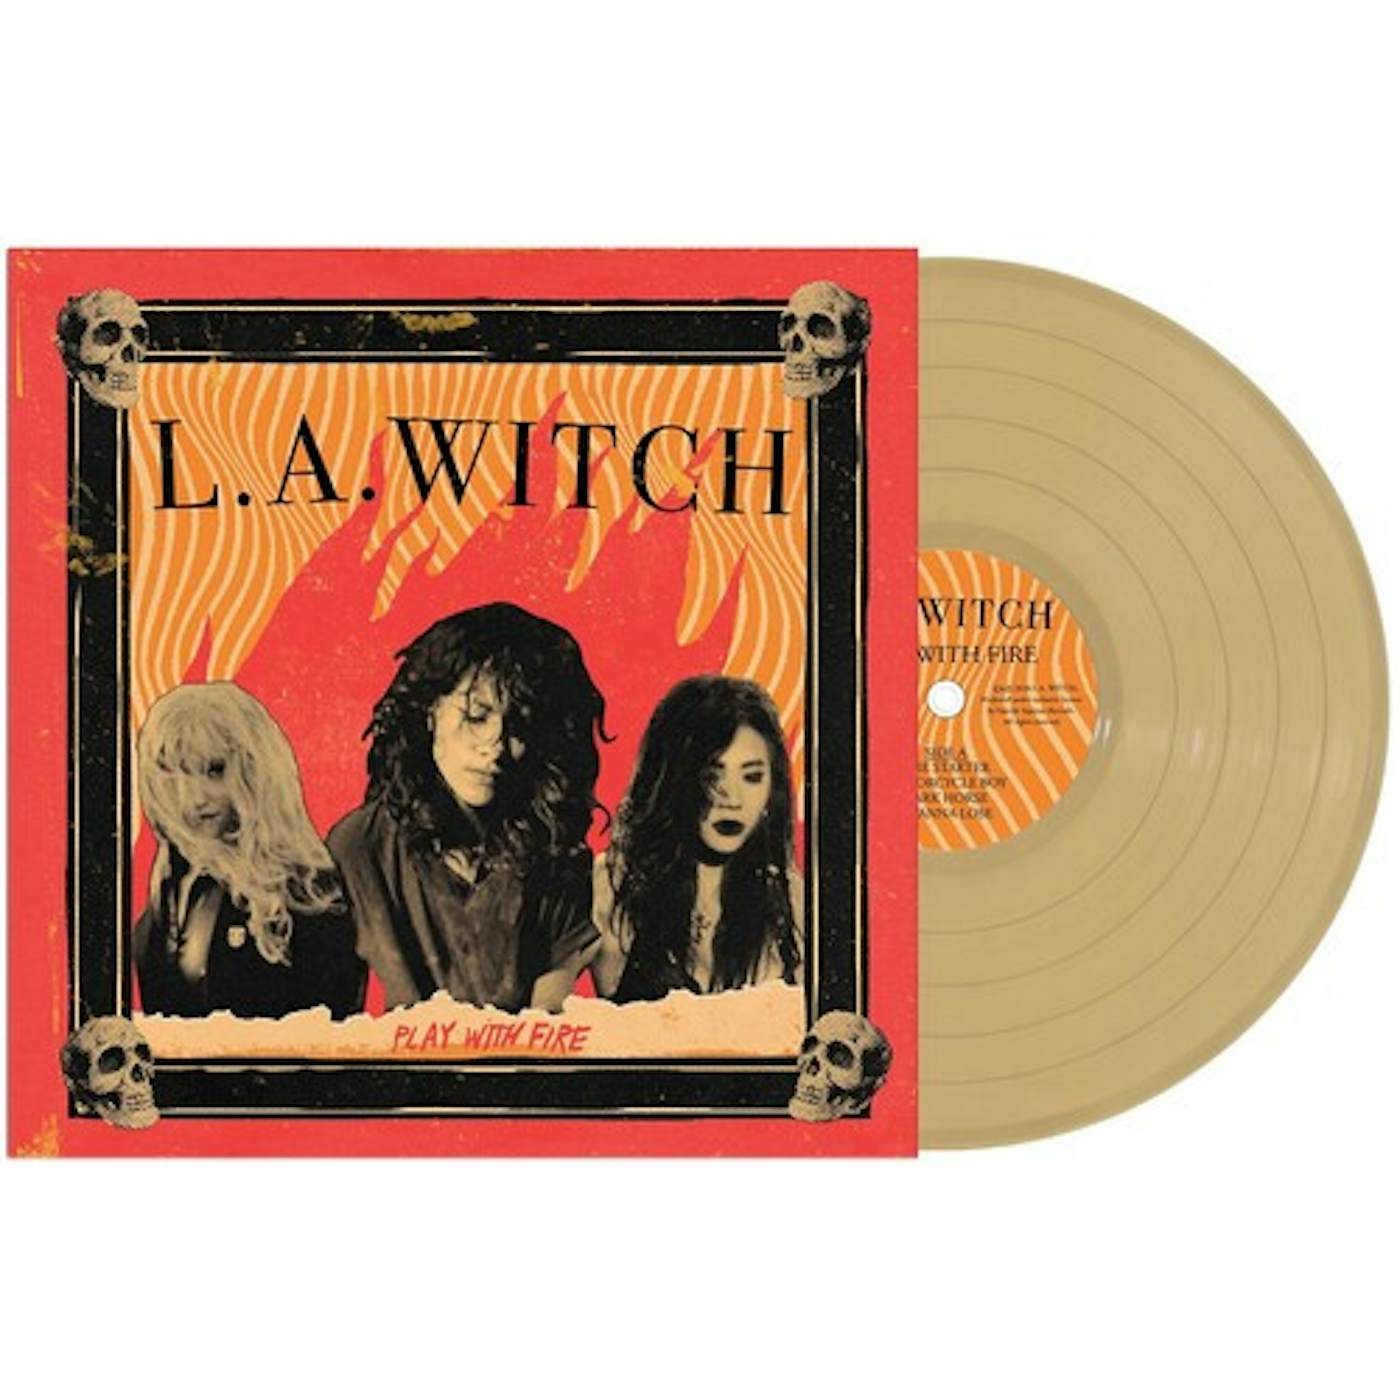 L.A. WITCH PLAY WITH FIRE - GOLD Vinyl Record